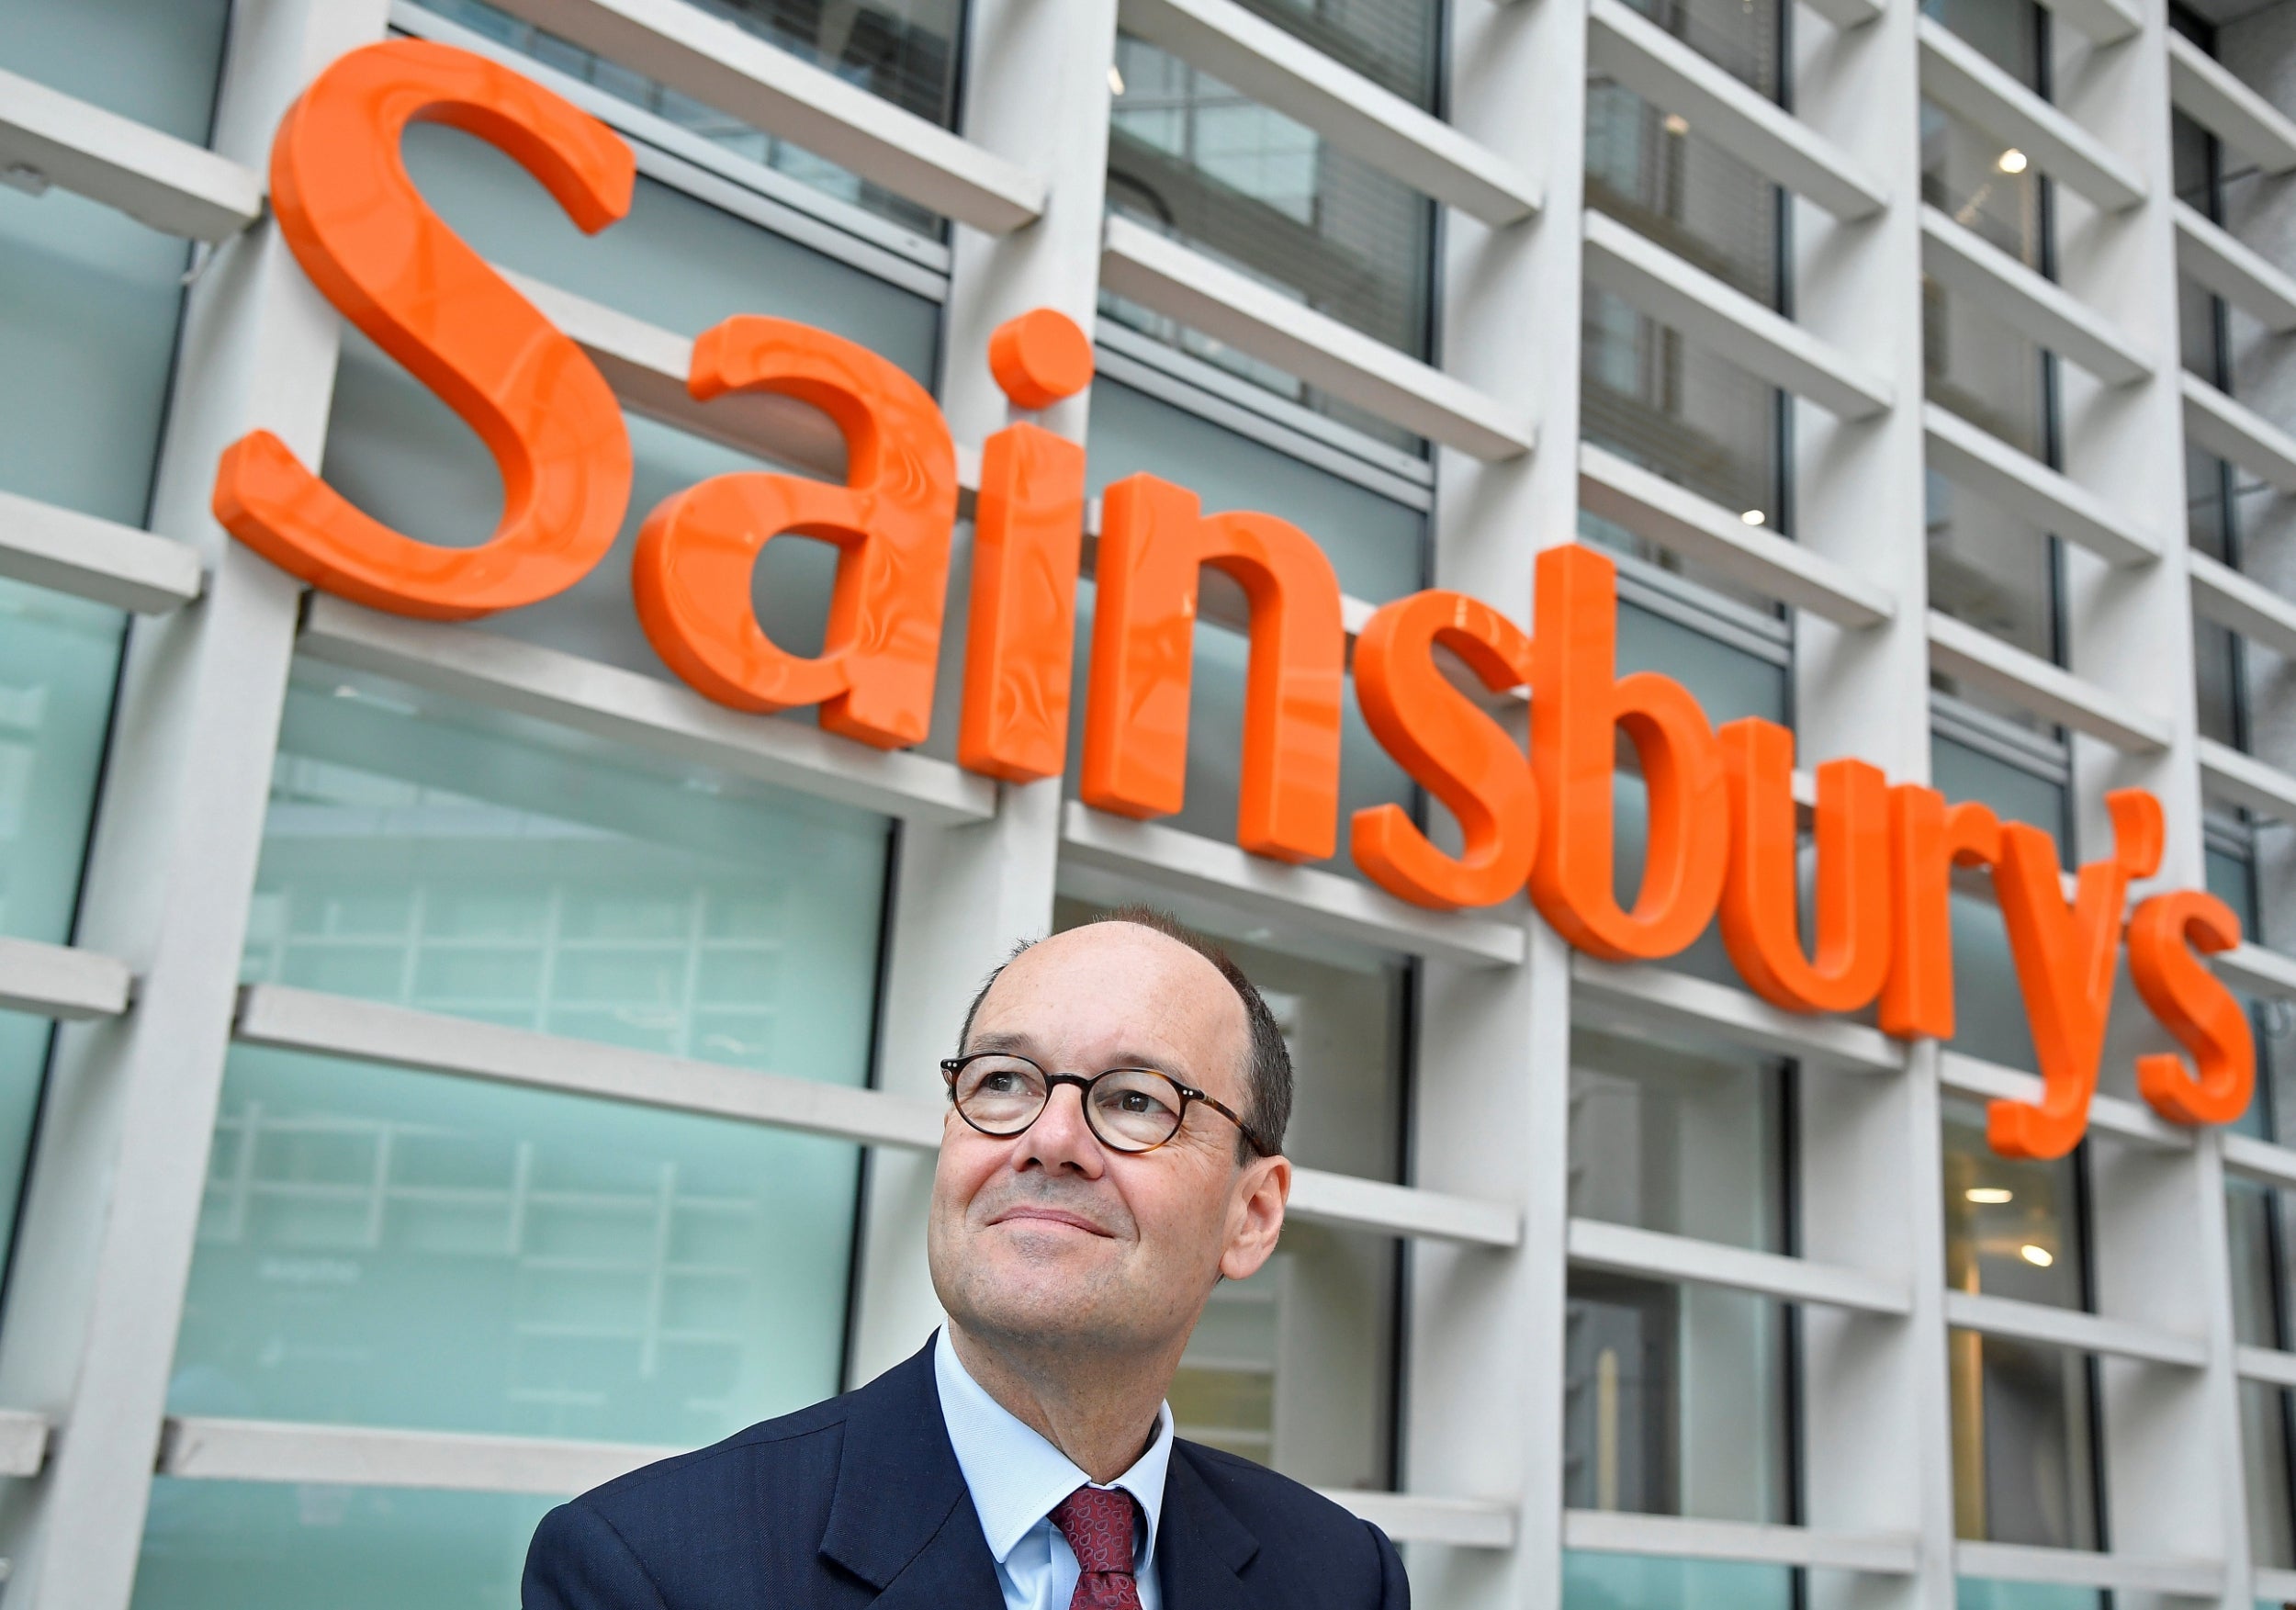 Sainsbury's has tried to win over shoppers in recent months by lowering prices